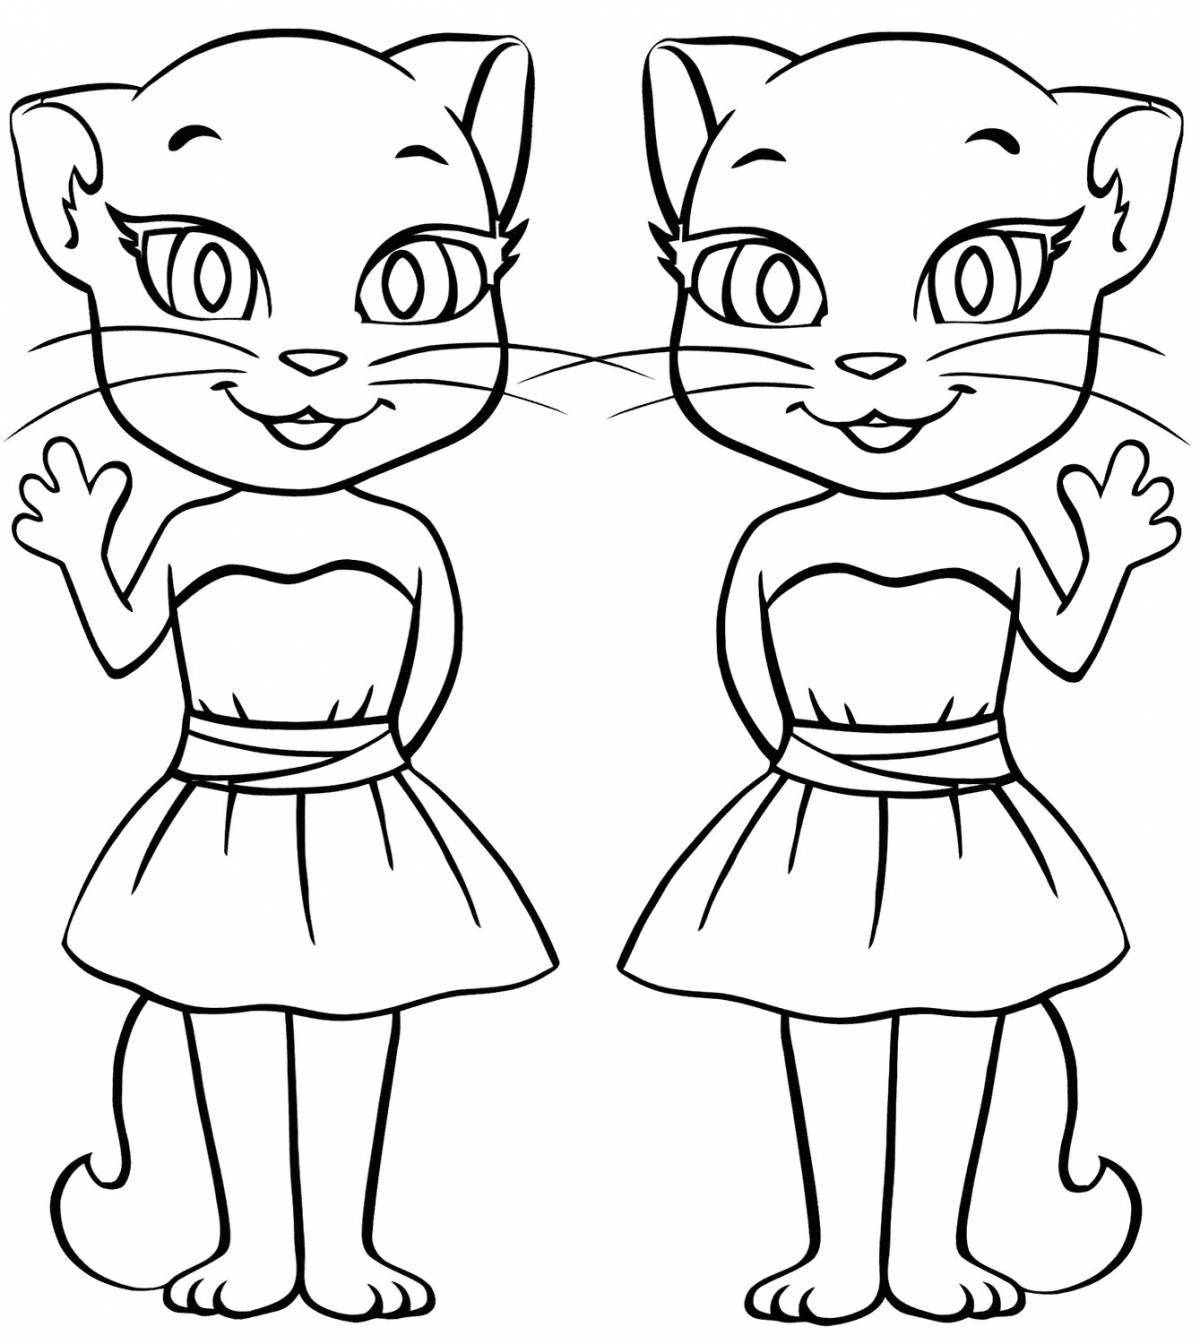 Coloring plush kitten with clothes